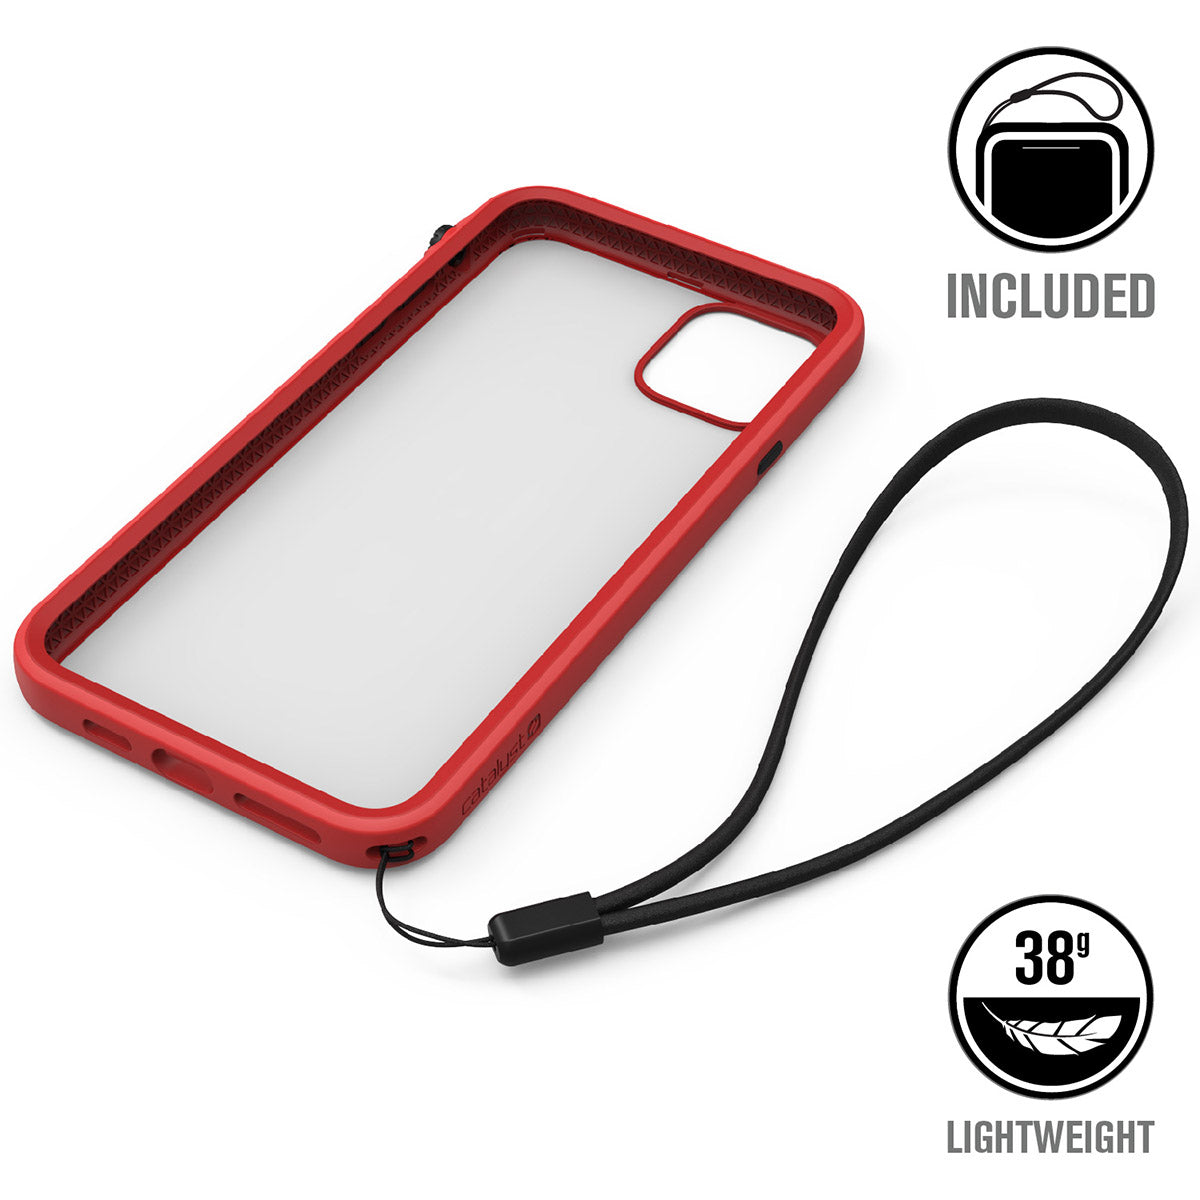 catalyst iPhone 11 series impact protection case empty flame red case for iPhone 11 pro max with a lanyard text reads included 35g lightweight